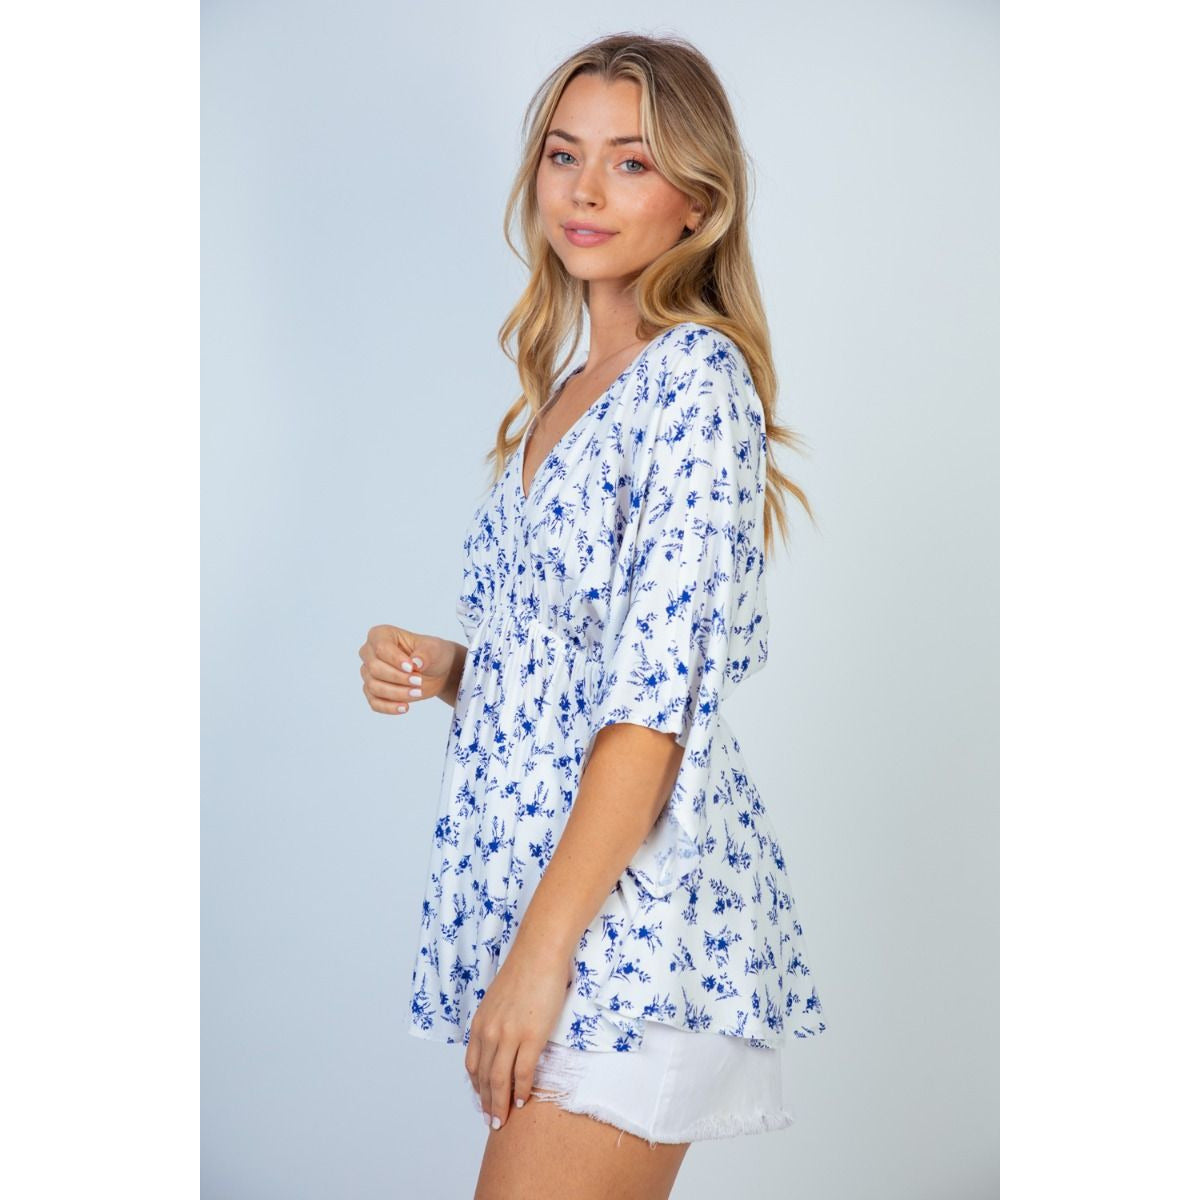 Tiffany White and Blue Floral Top - Rhapsody and Renascence